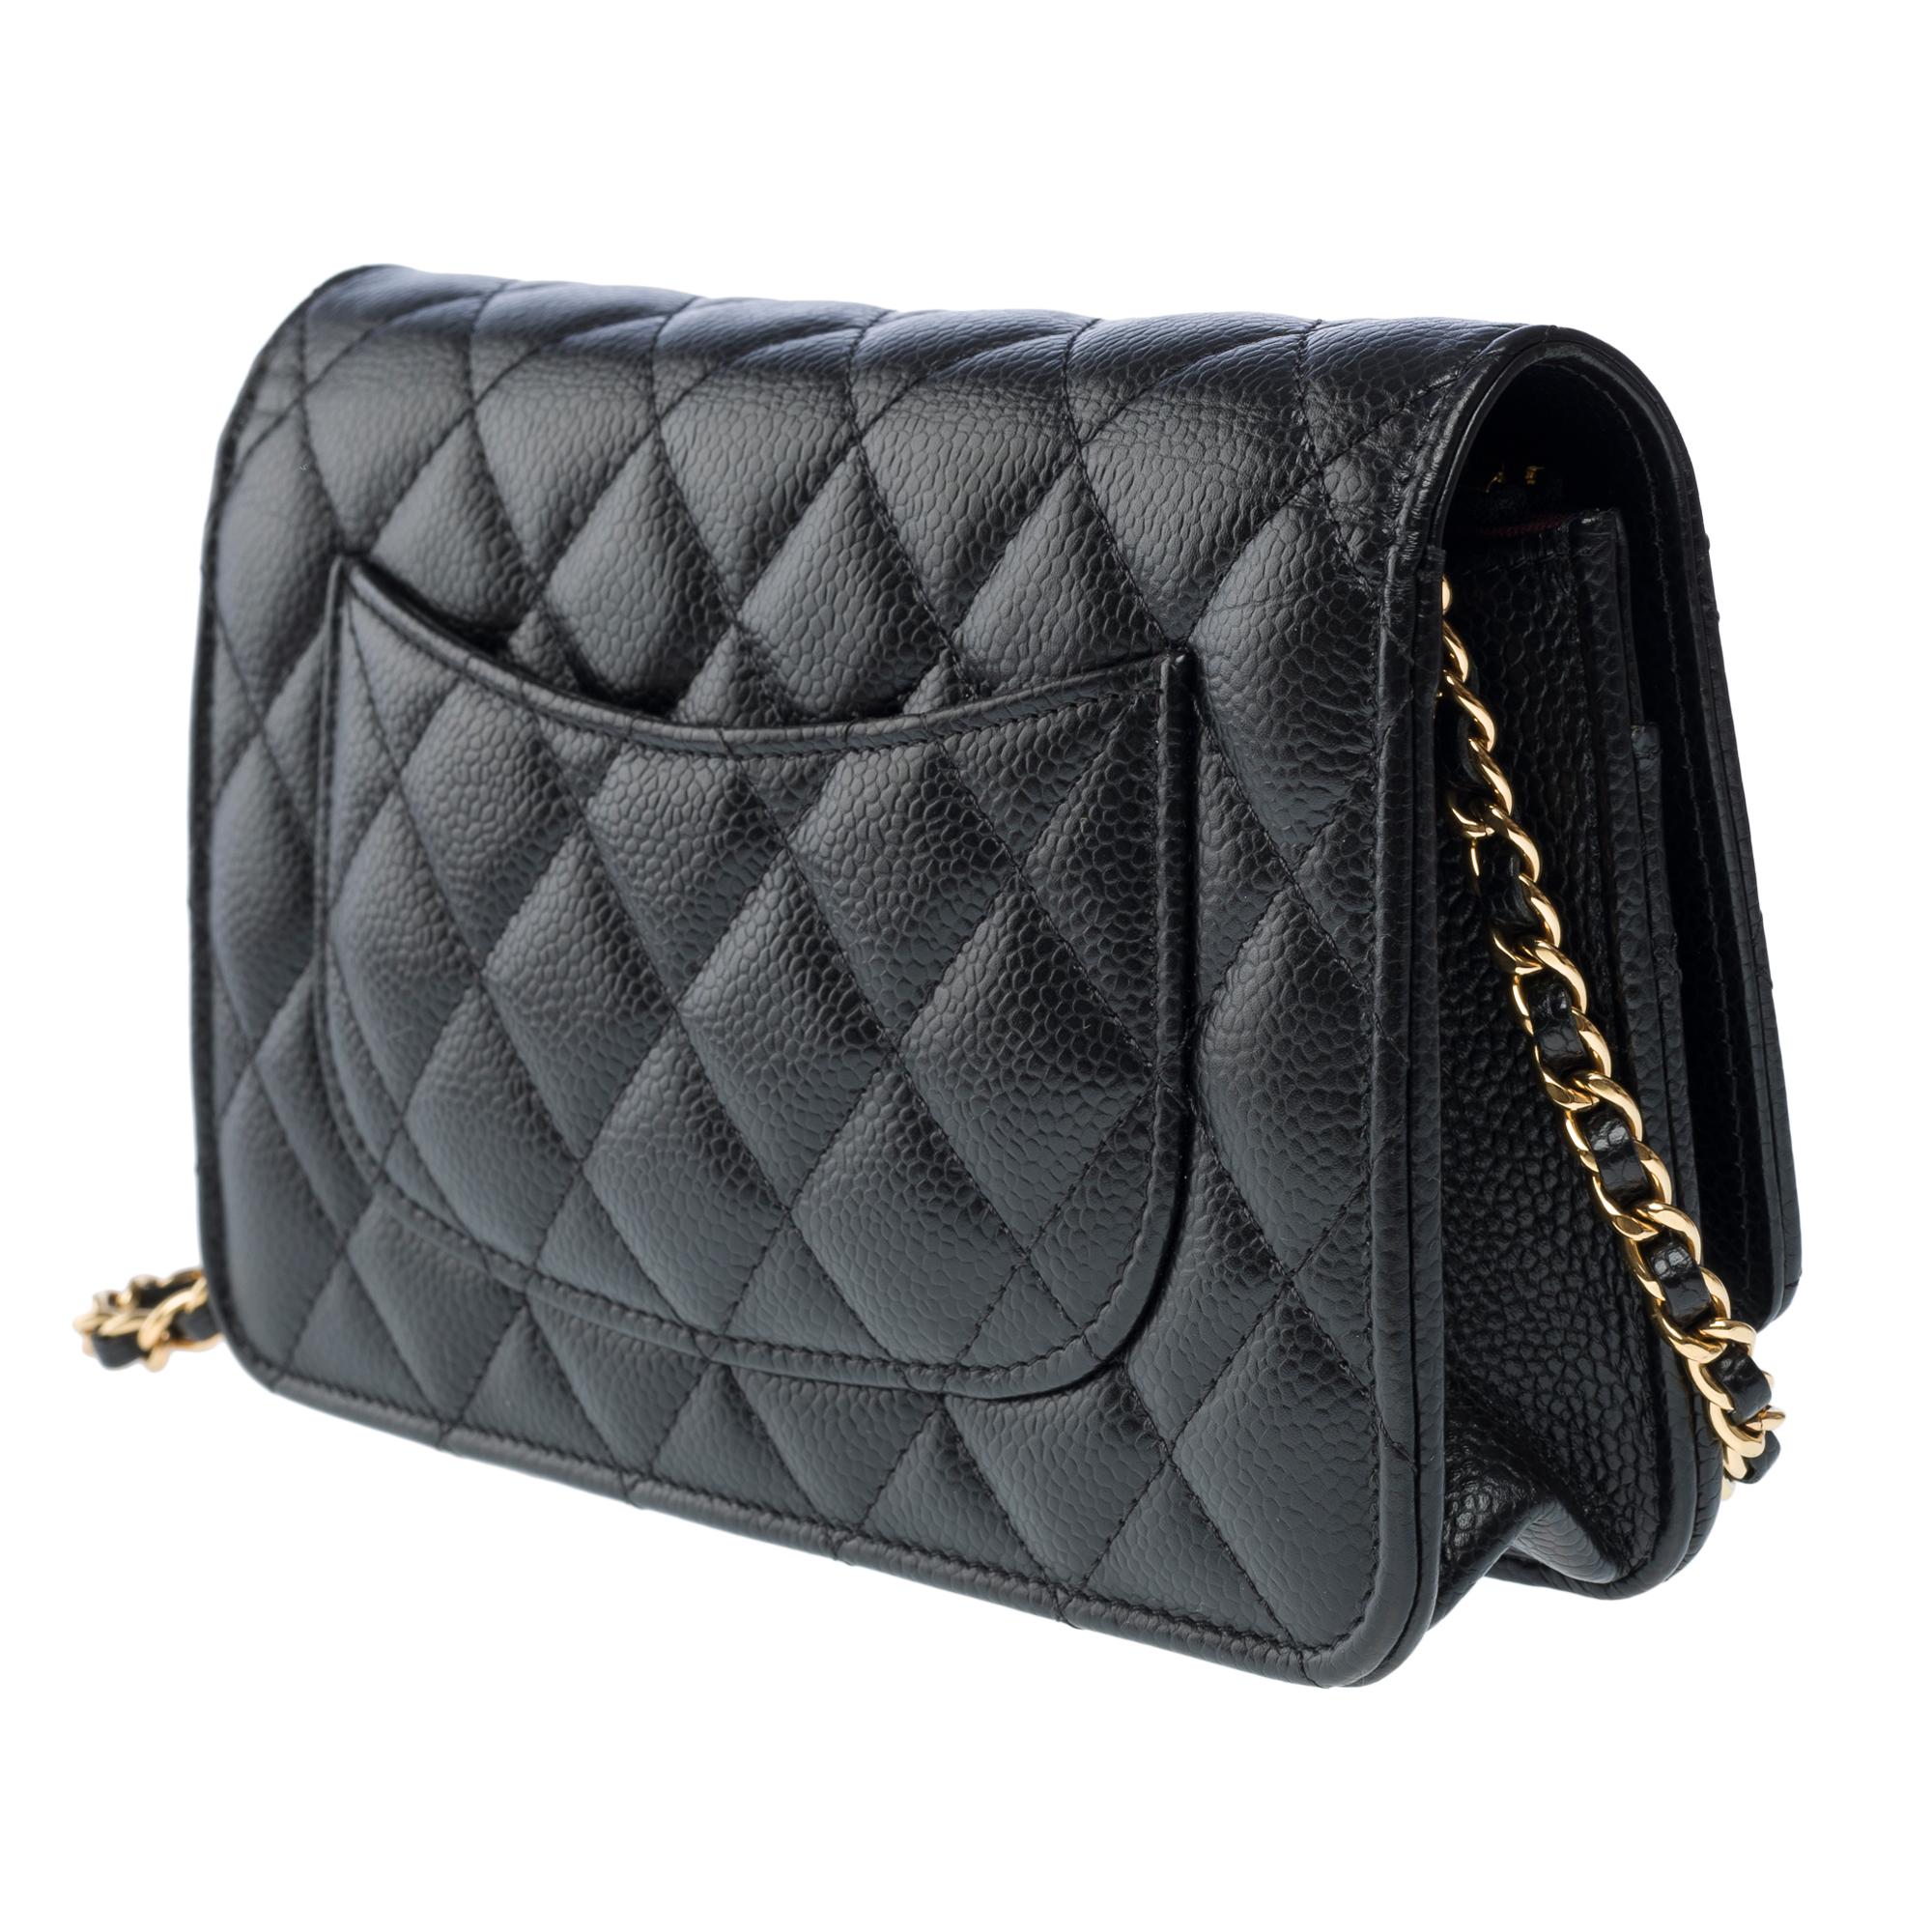 Chanel Wallet on Chain (WOC)  shoulder bag in black Caviar quilted leather, GHW For Sale 2